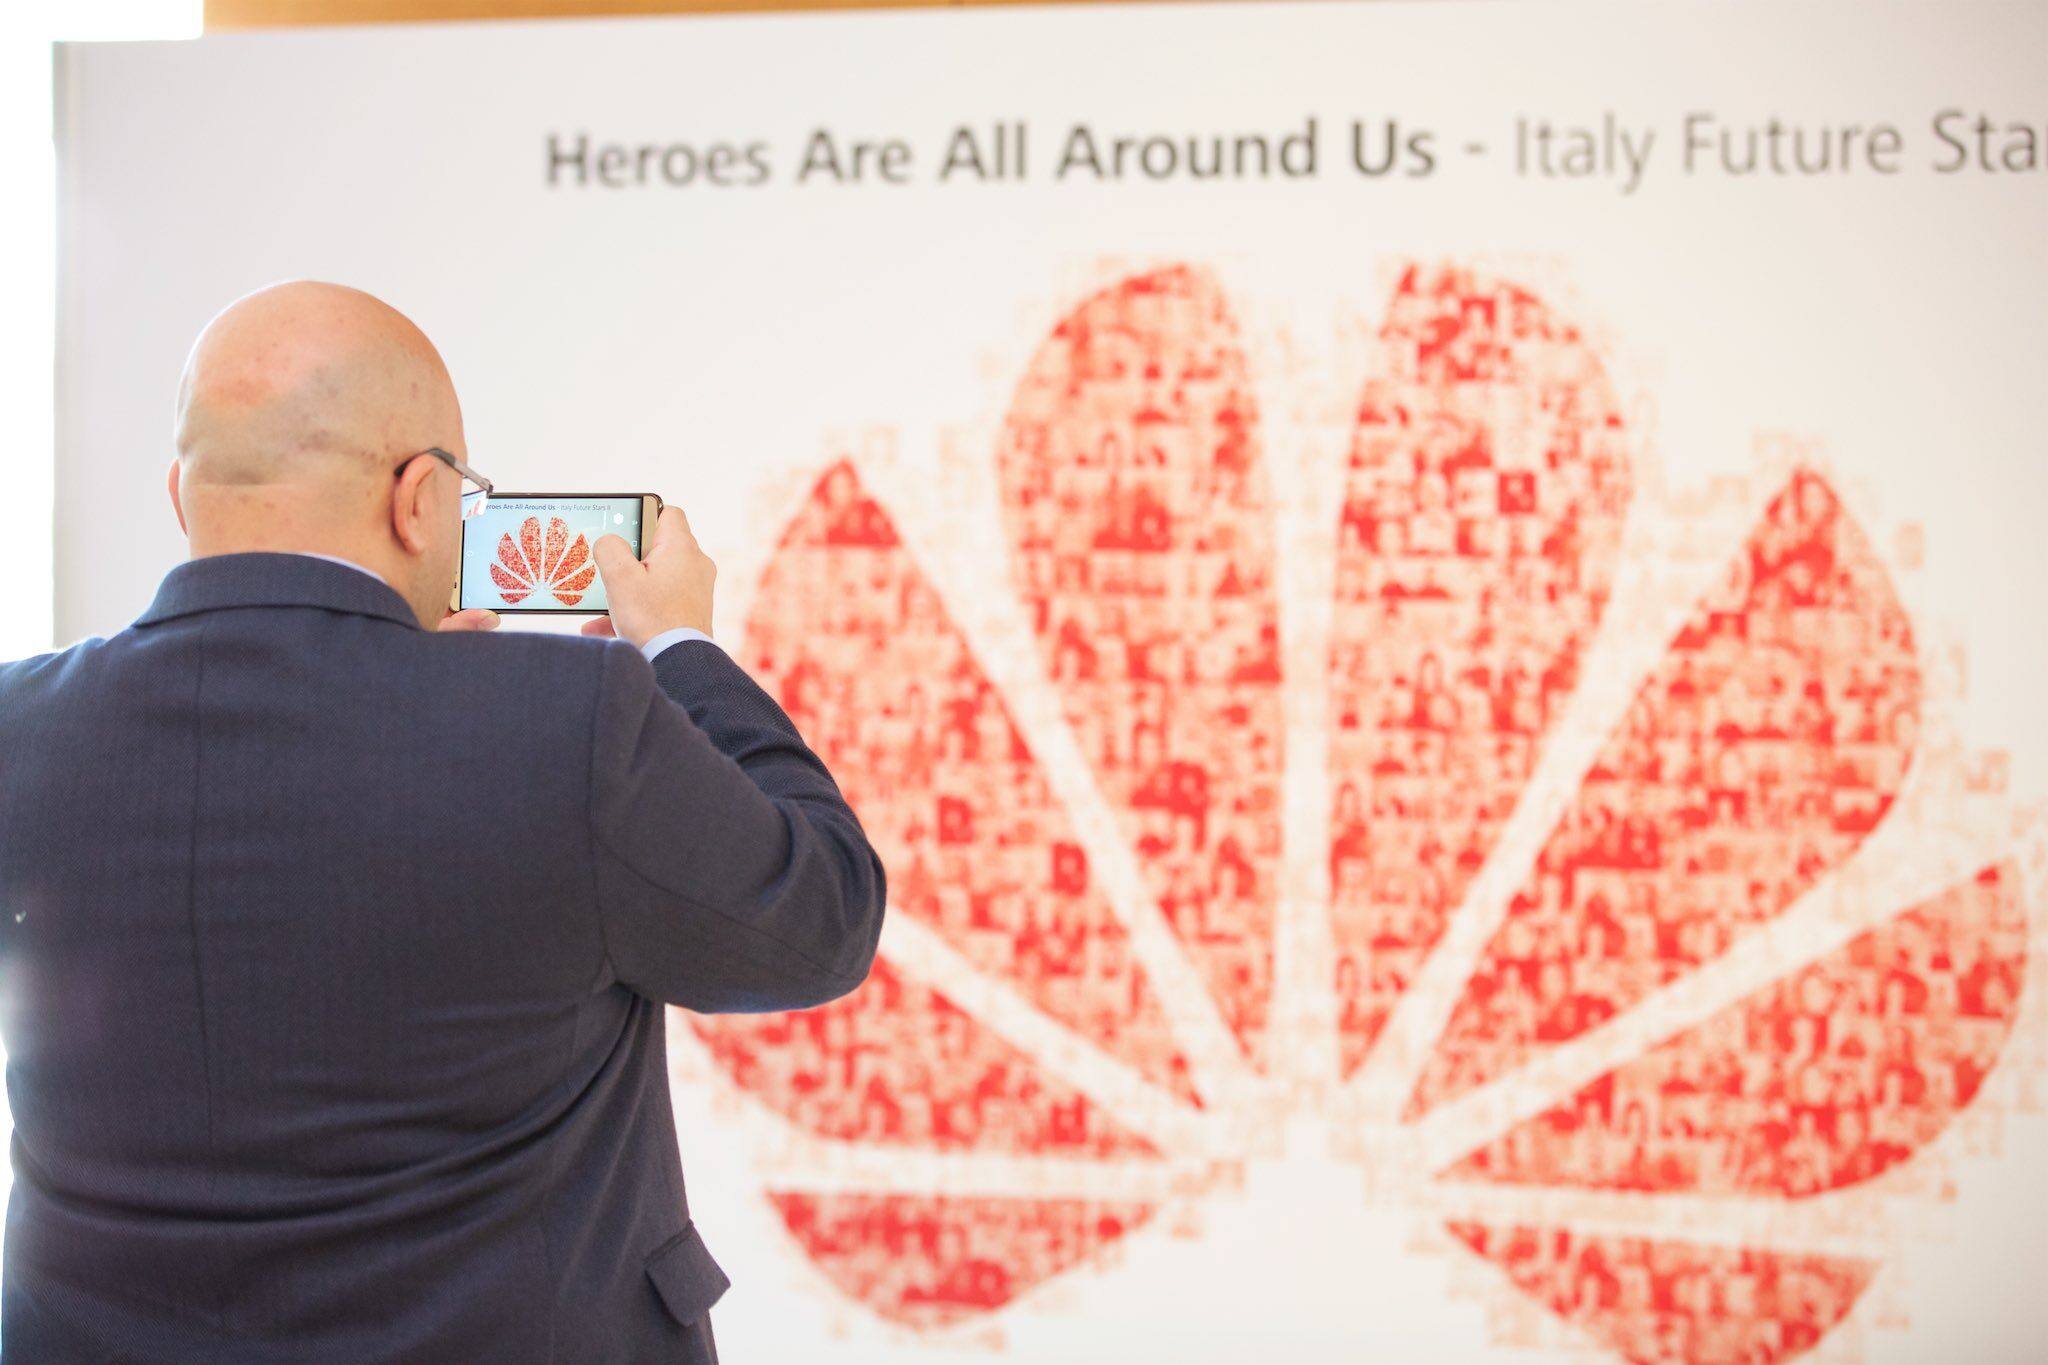 Huawei Italy honours 138 of its staff who were awarded the title of ‘Future Stars’ by creating a version of the company logo with their profile pictures.